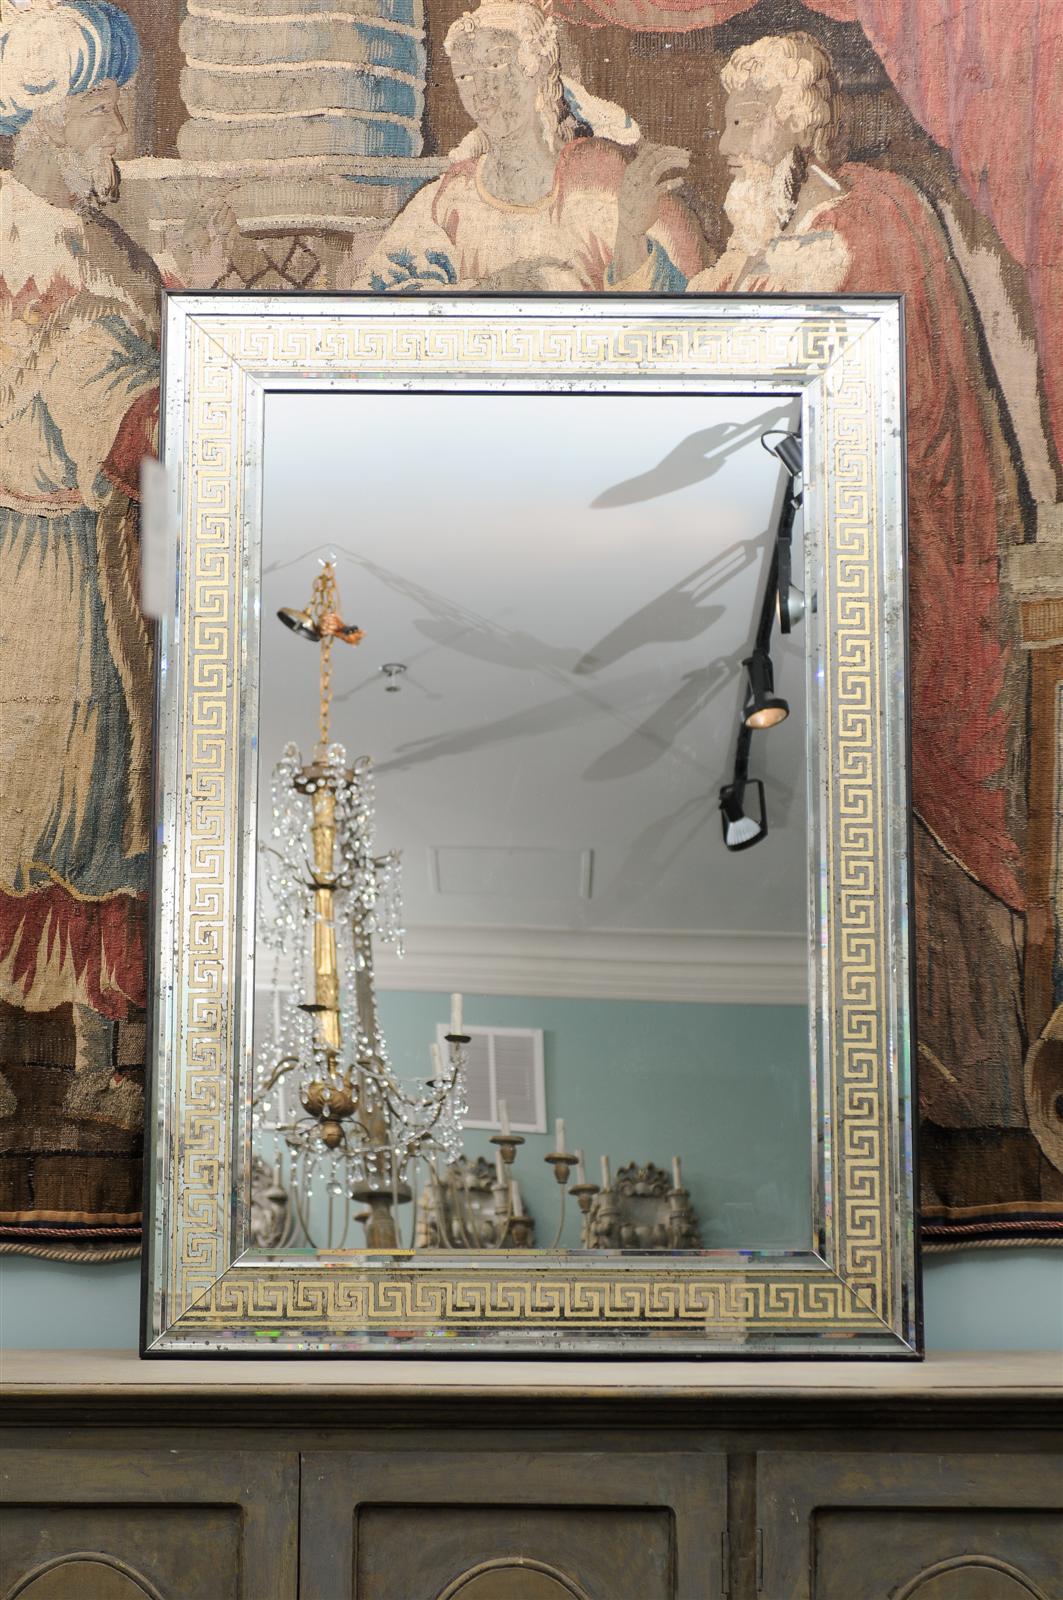 An Exquisite Large Scale Mirror with Eglomisé Greek Key Motif in the Surround.